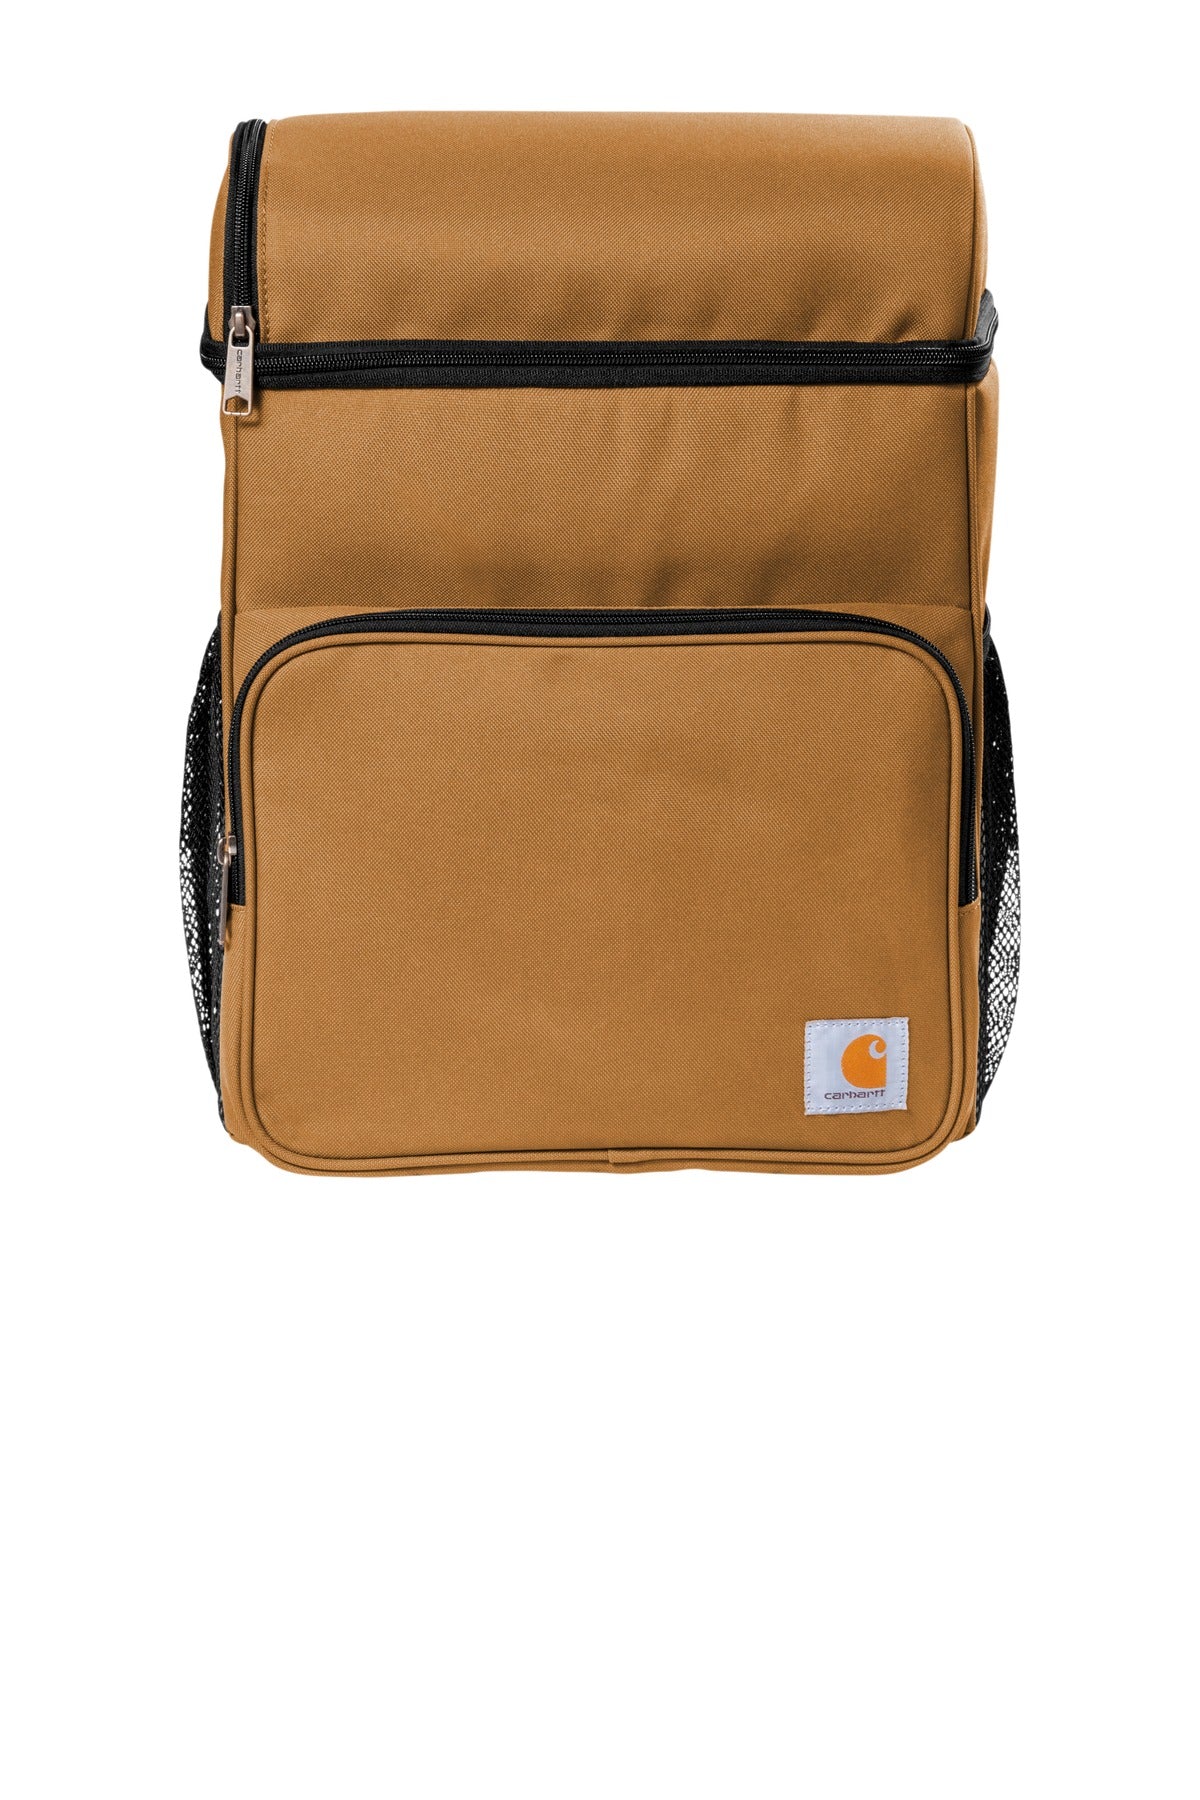 Carhartt? Backpack 20-Can Cooler. CT89132109